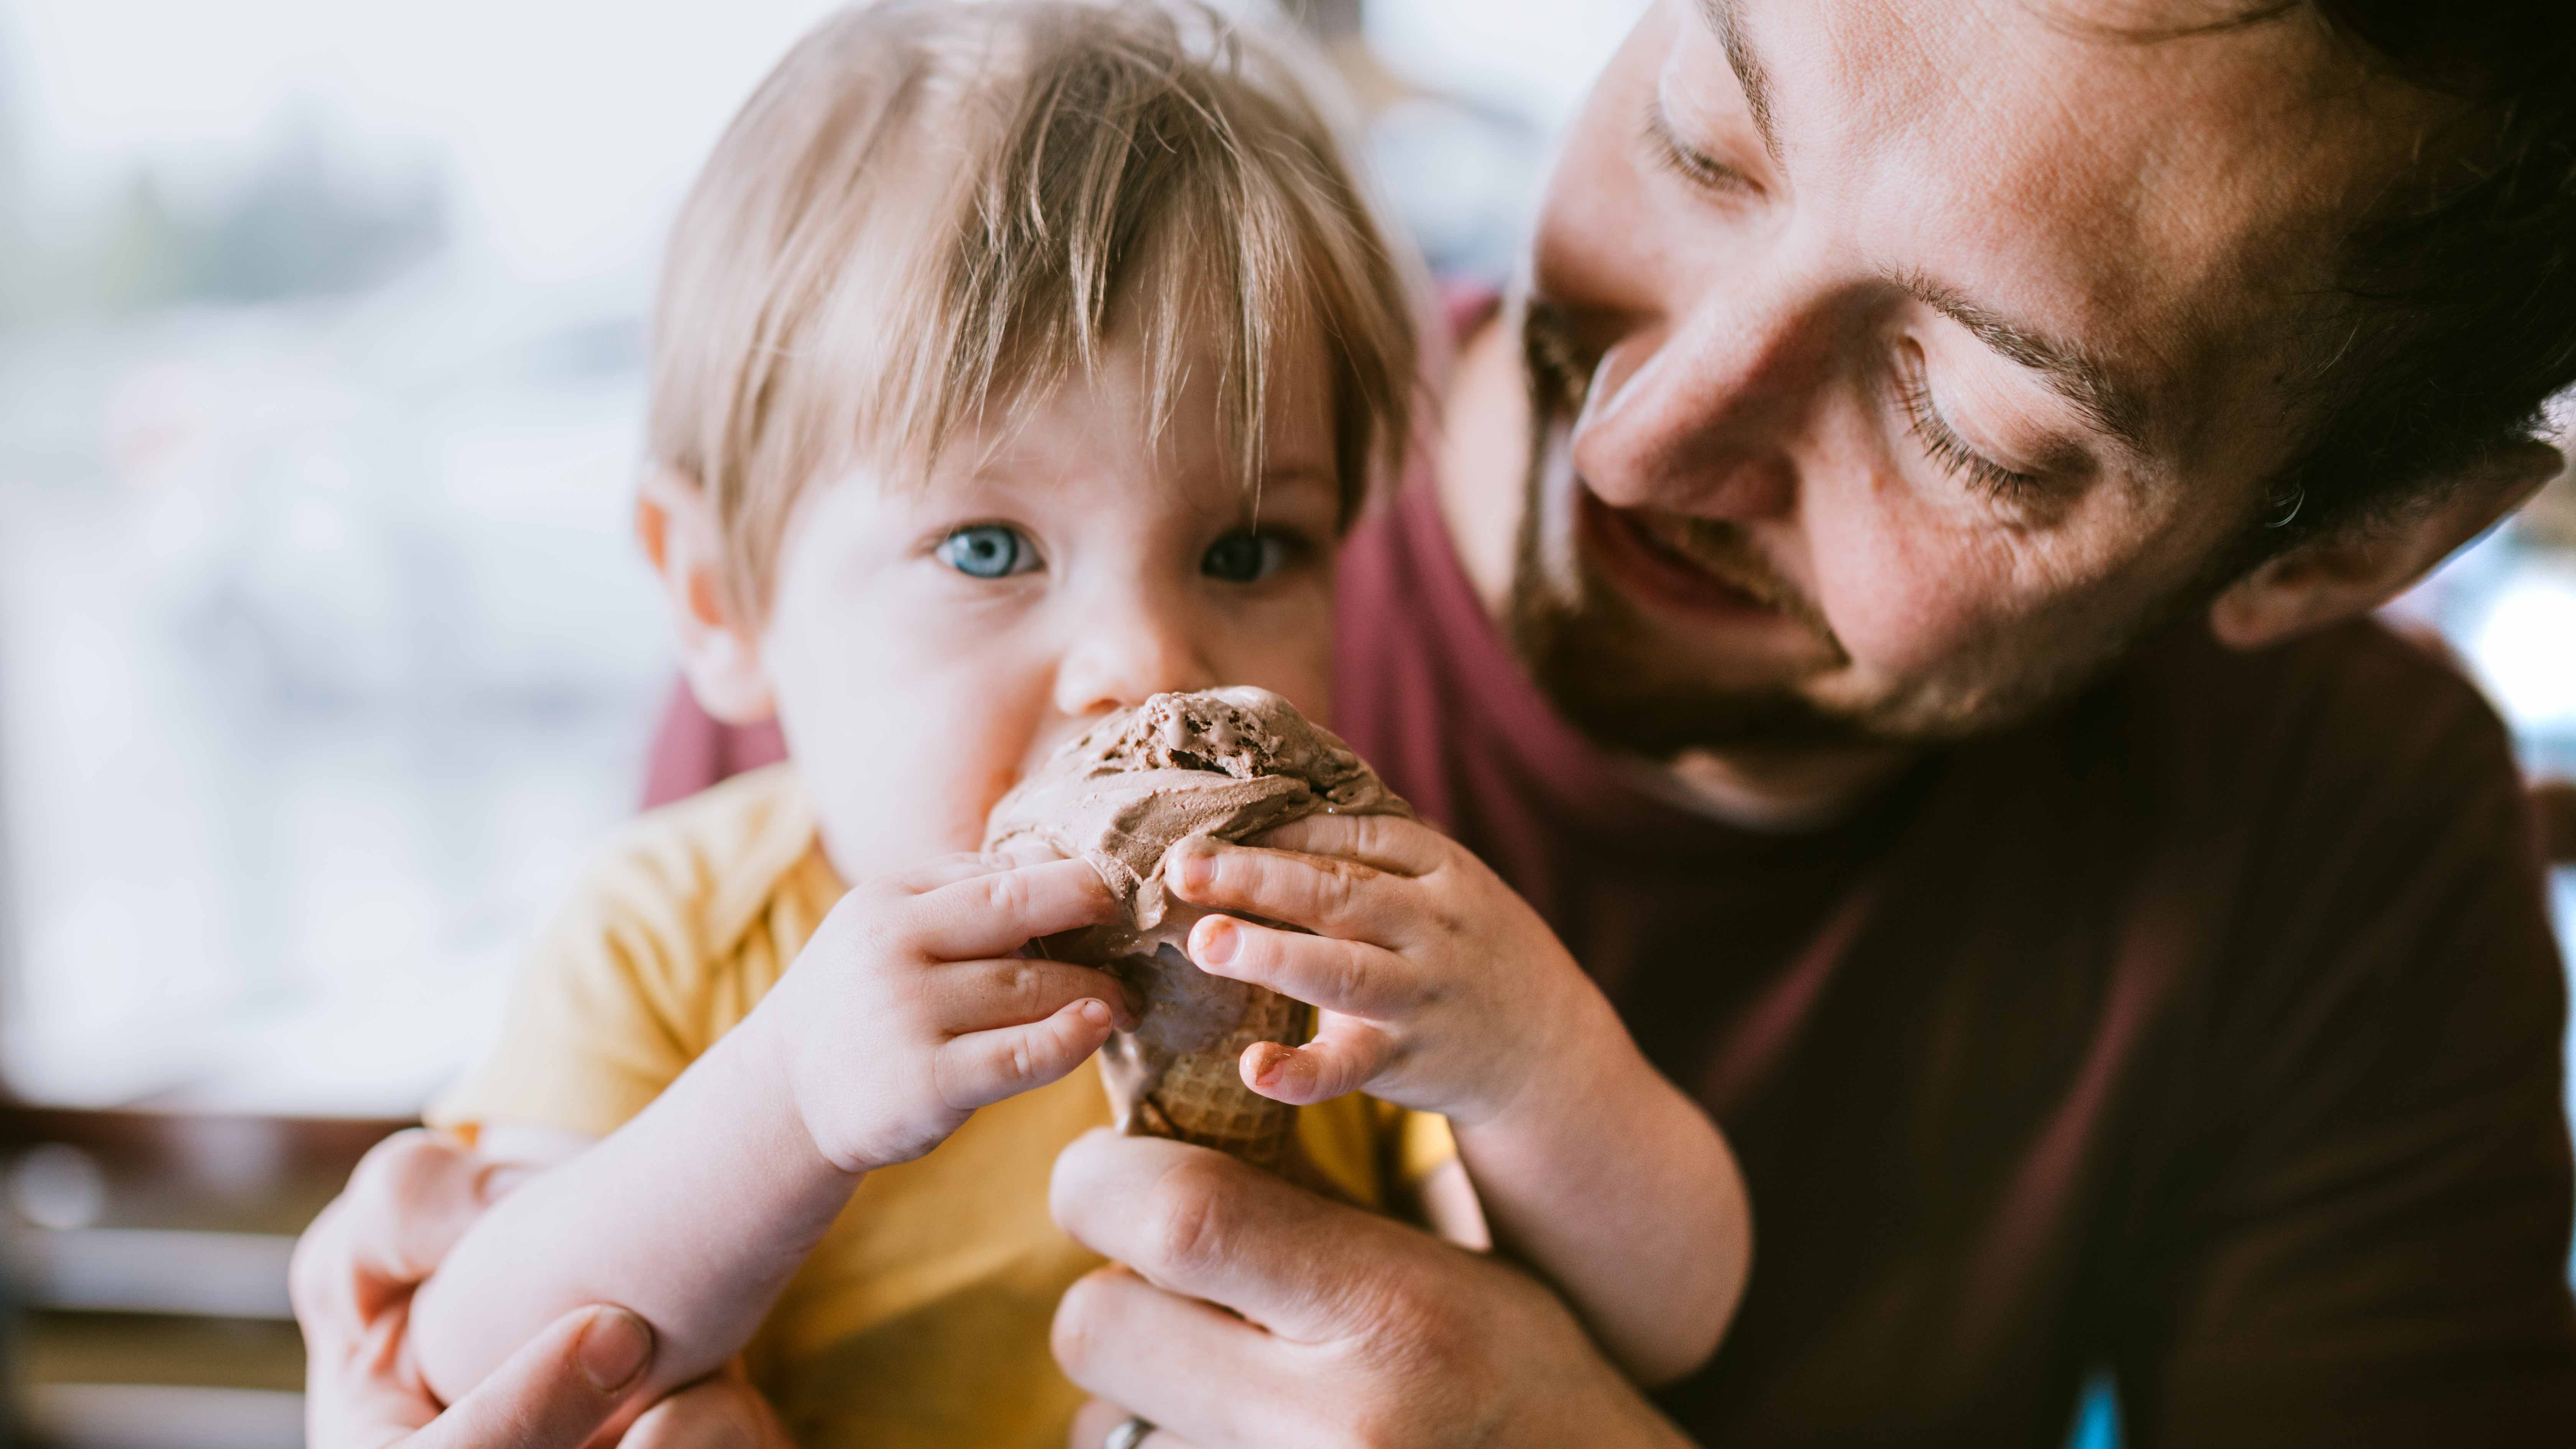 parent holding and helping a young child eat an ice cream cone